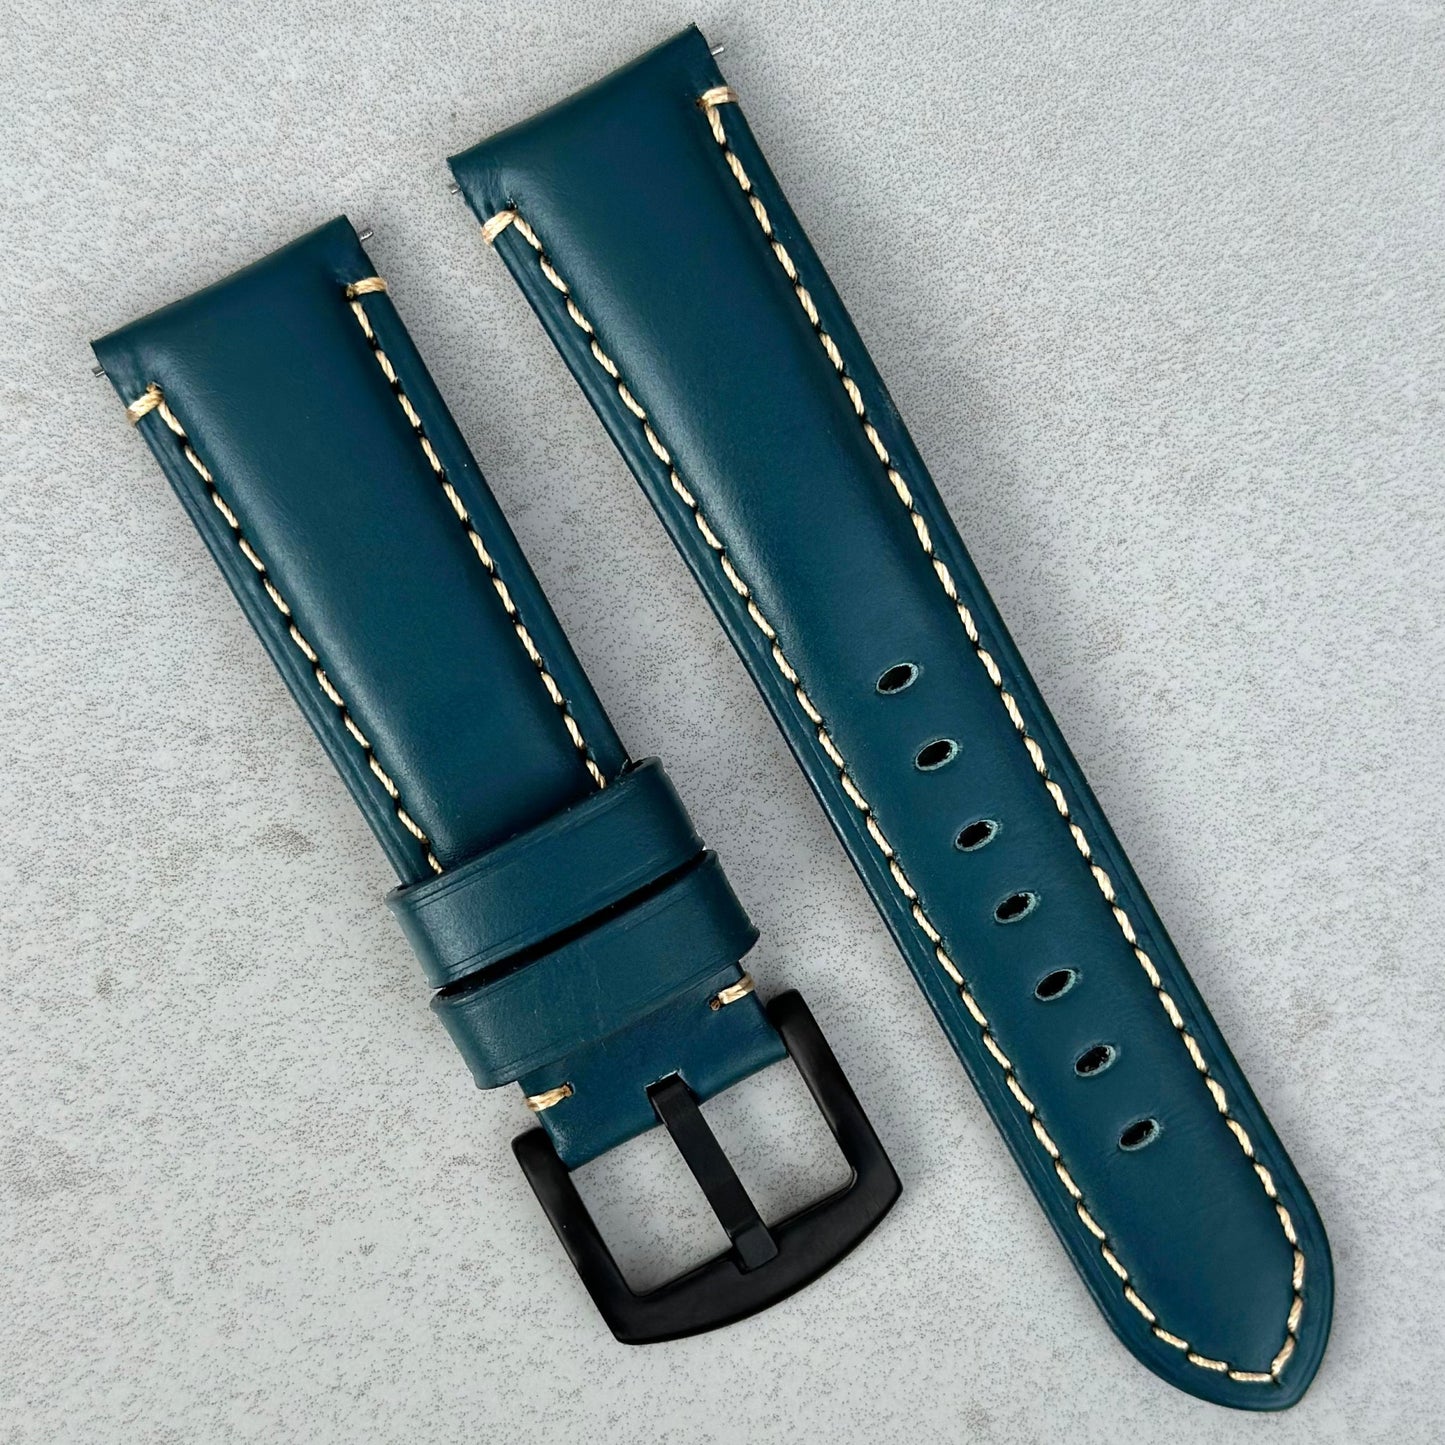 Oslo petrol blue leather watch strap with PVD black stainless steel buckle.